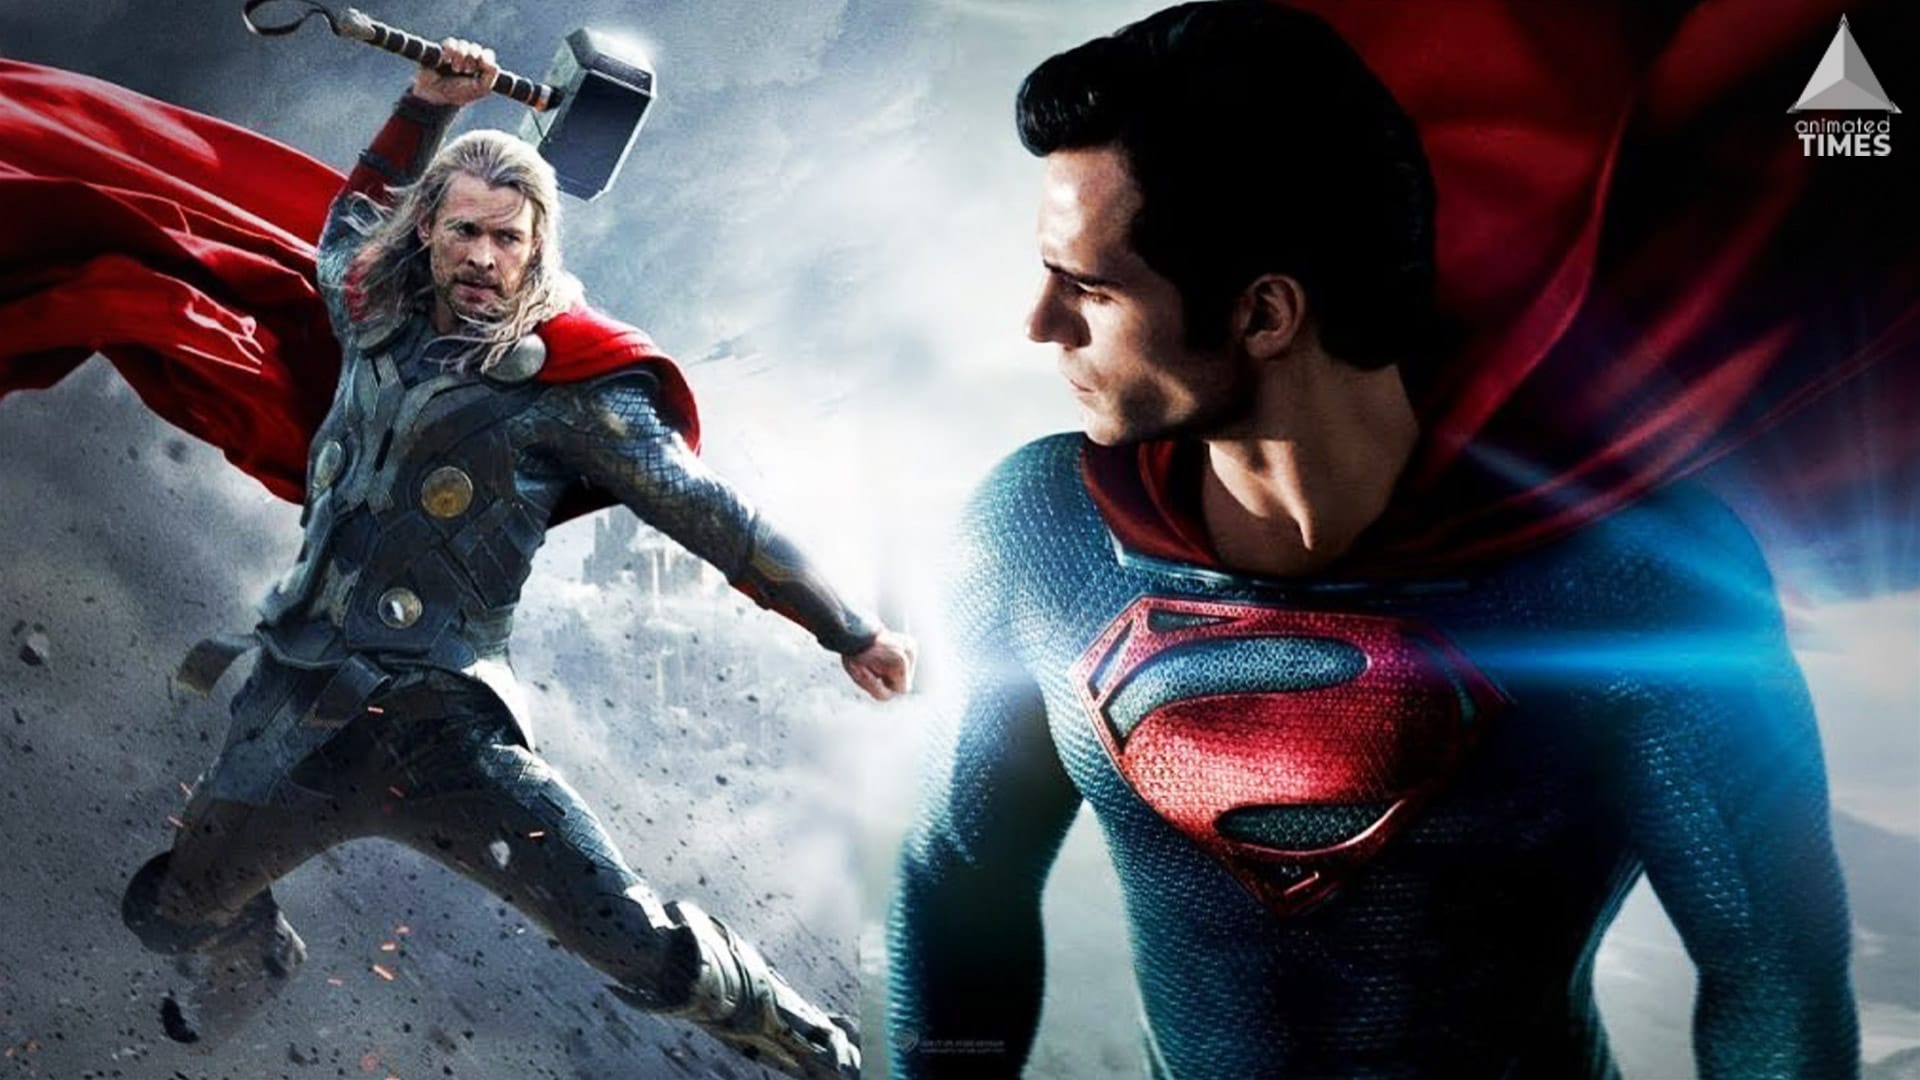 Can Thor beat Superman?